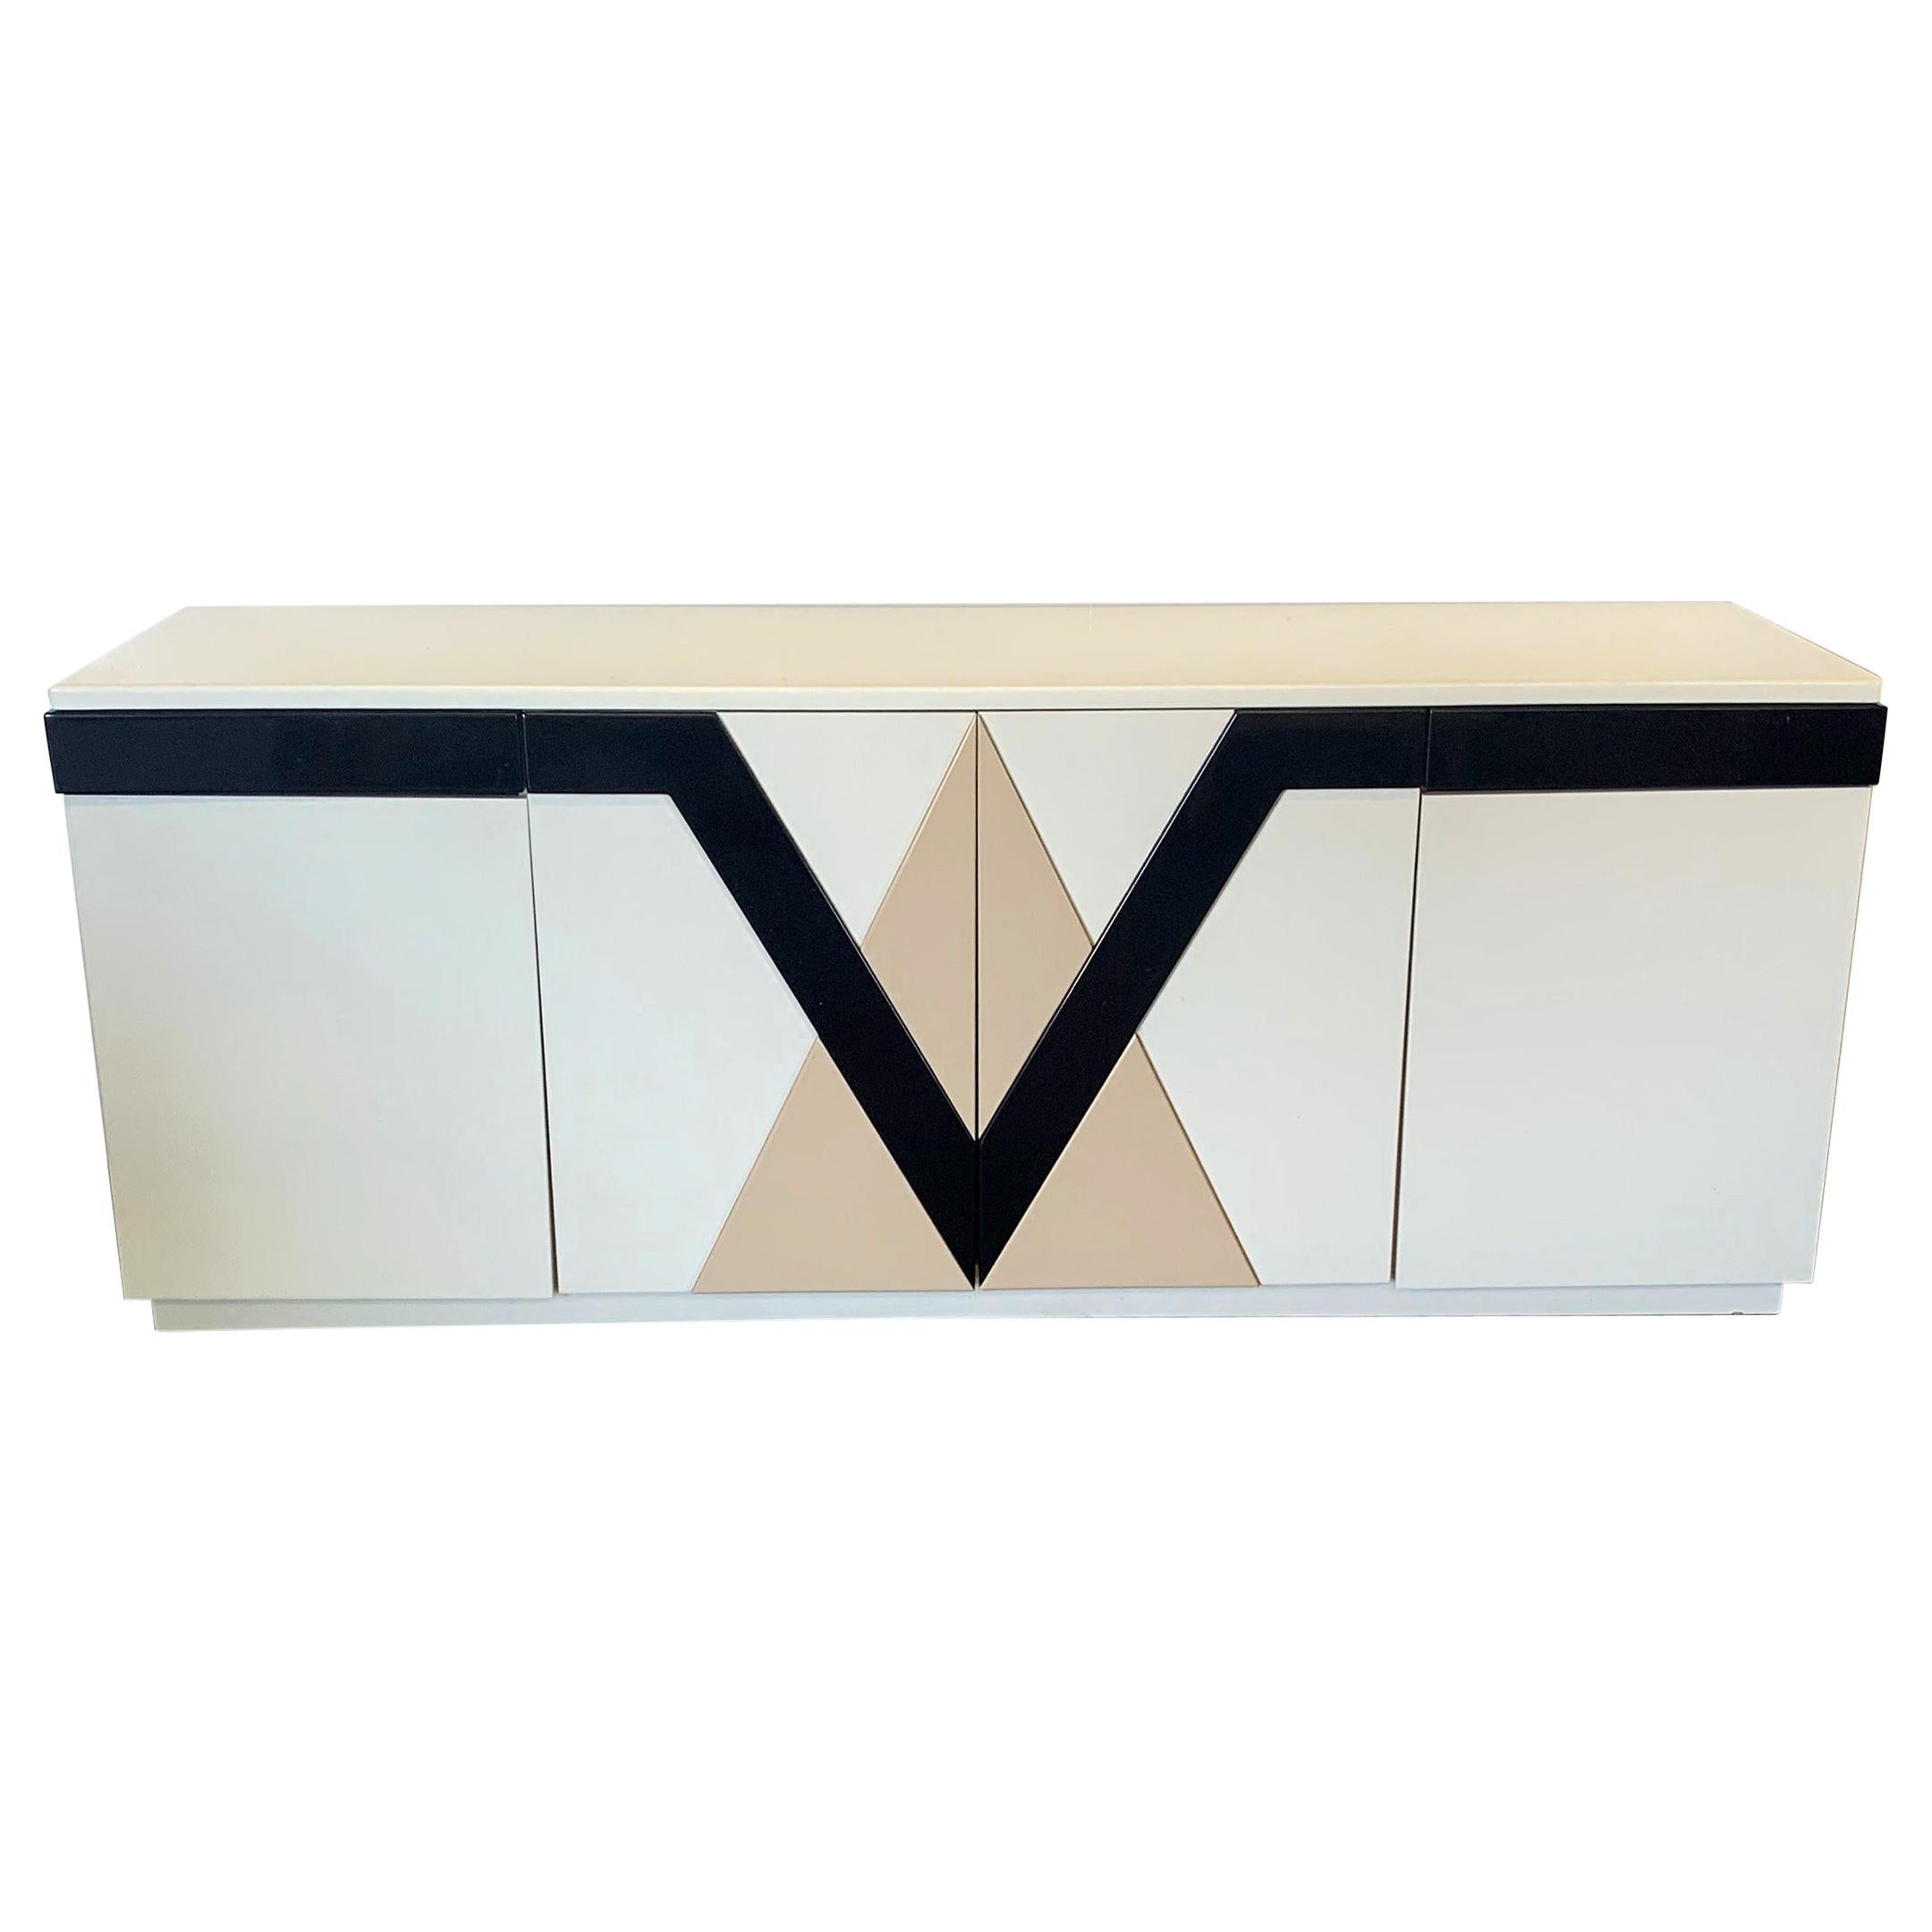 1980s Lacquered Postmodern Geometric Credenza